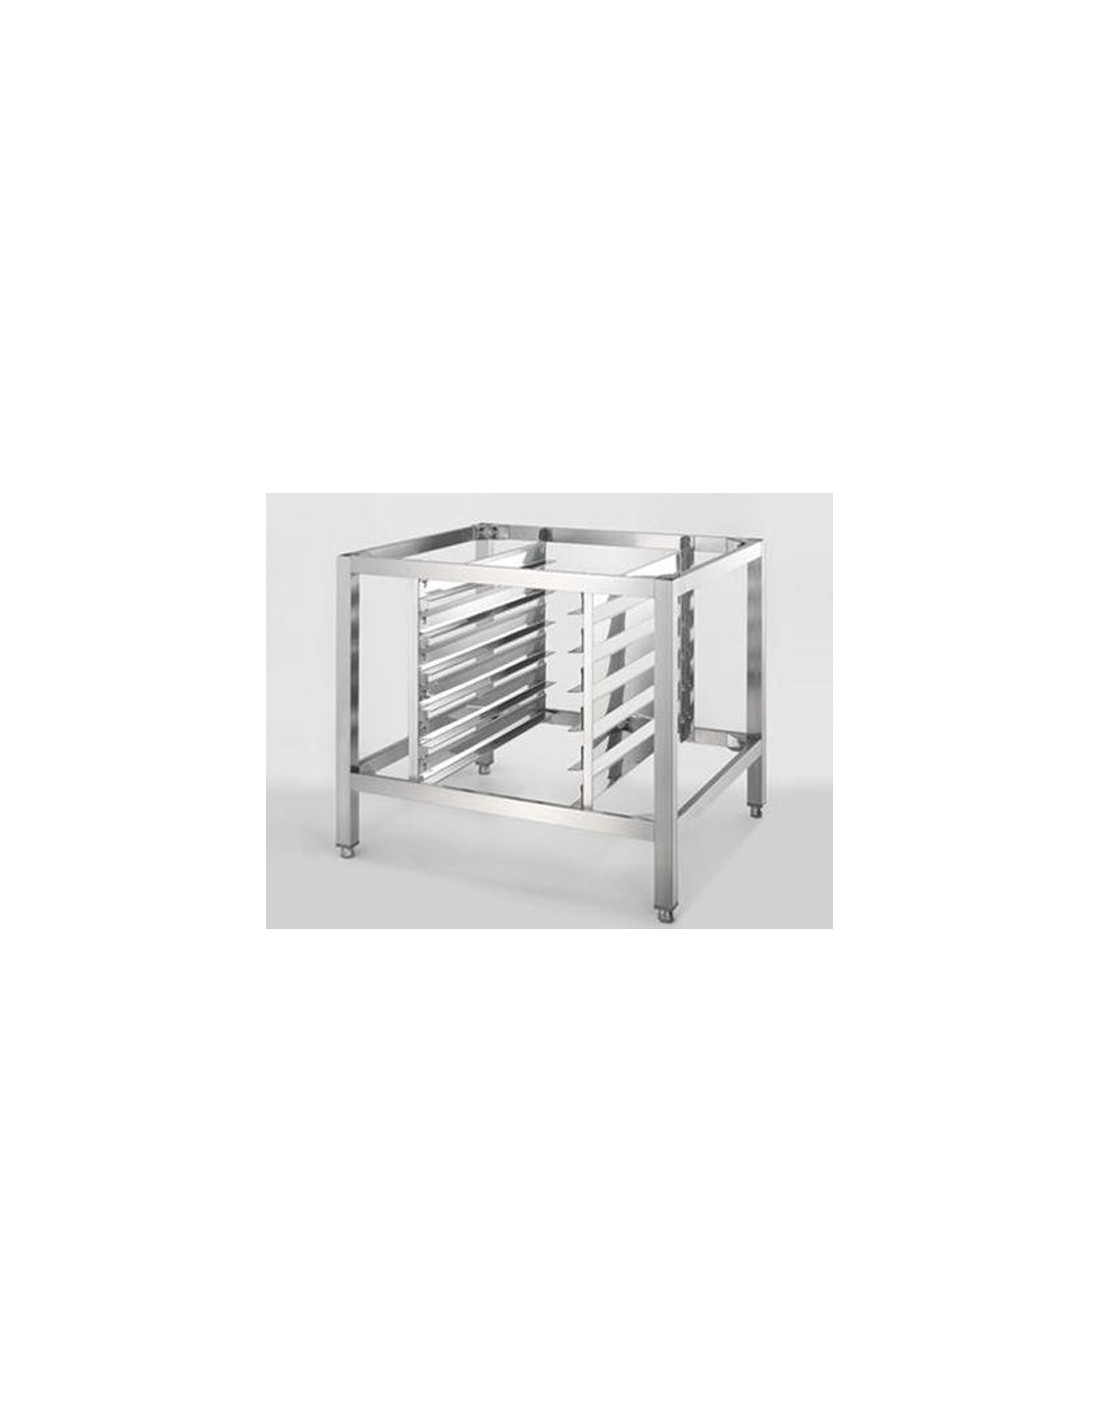 Stainless steel table + door h cm 68 - Capacity 6 sheets